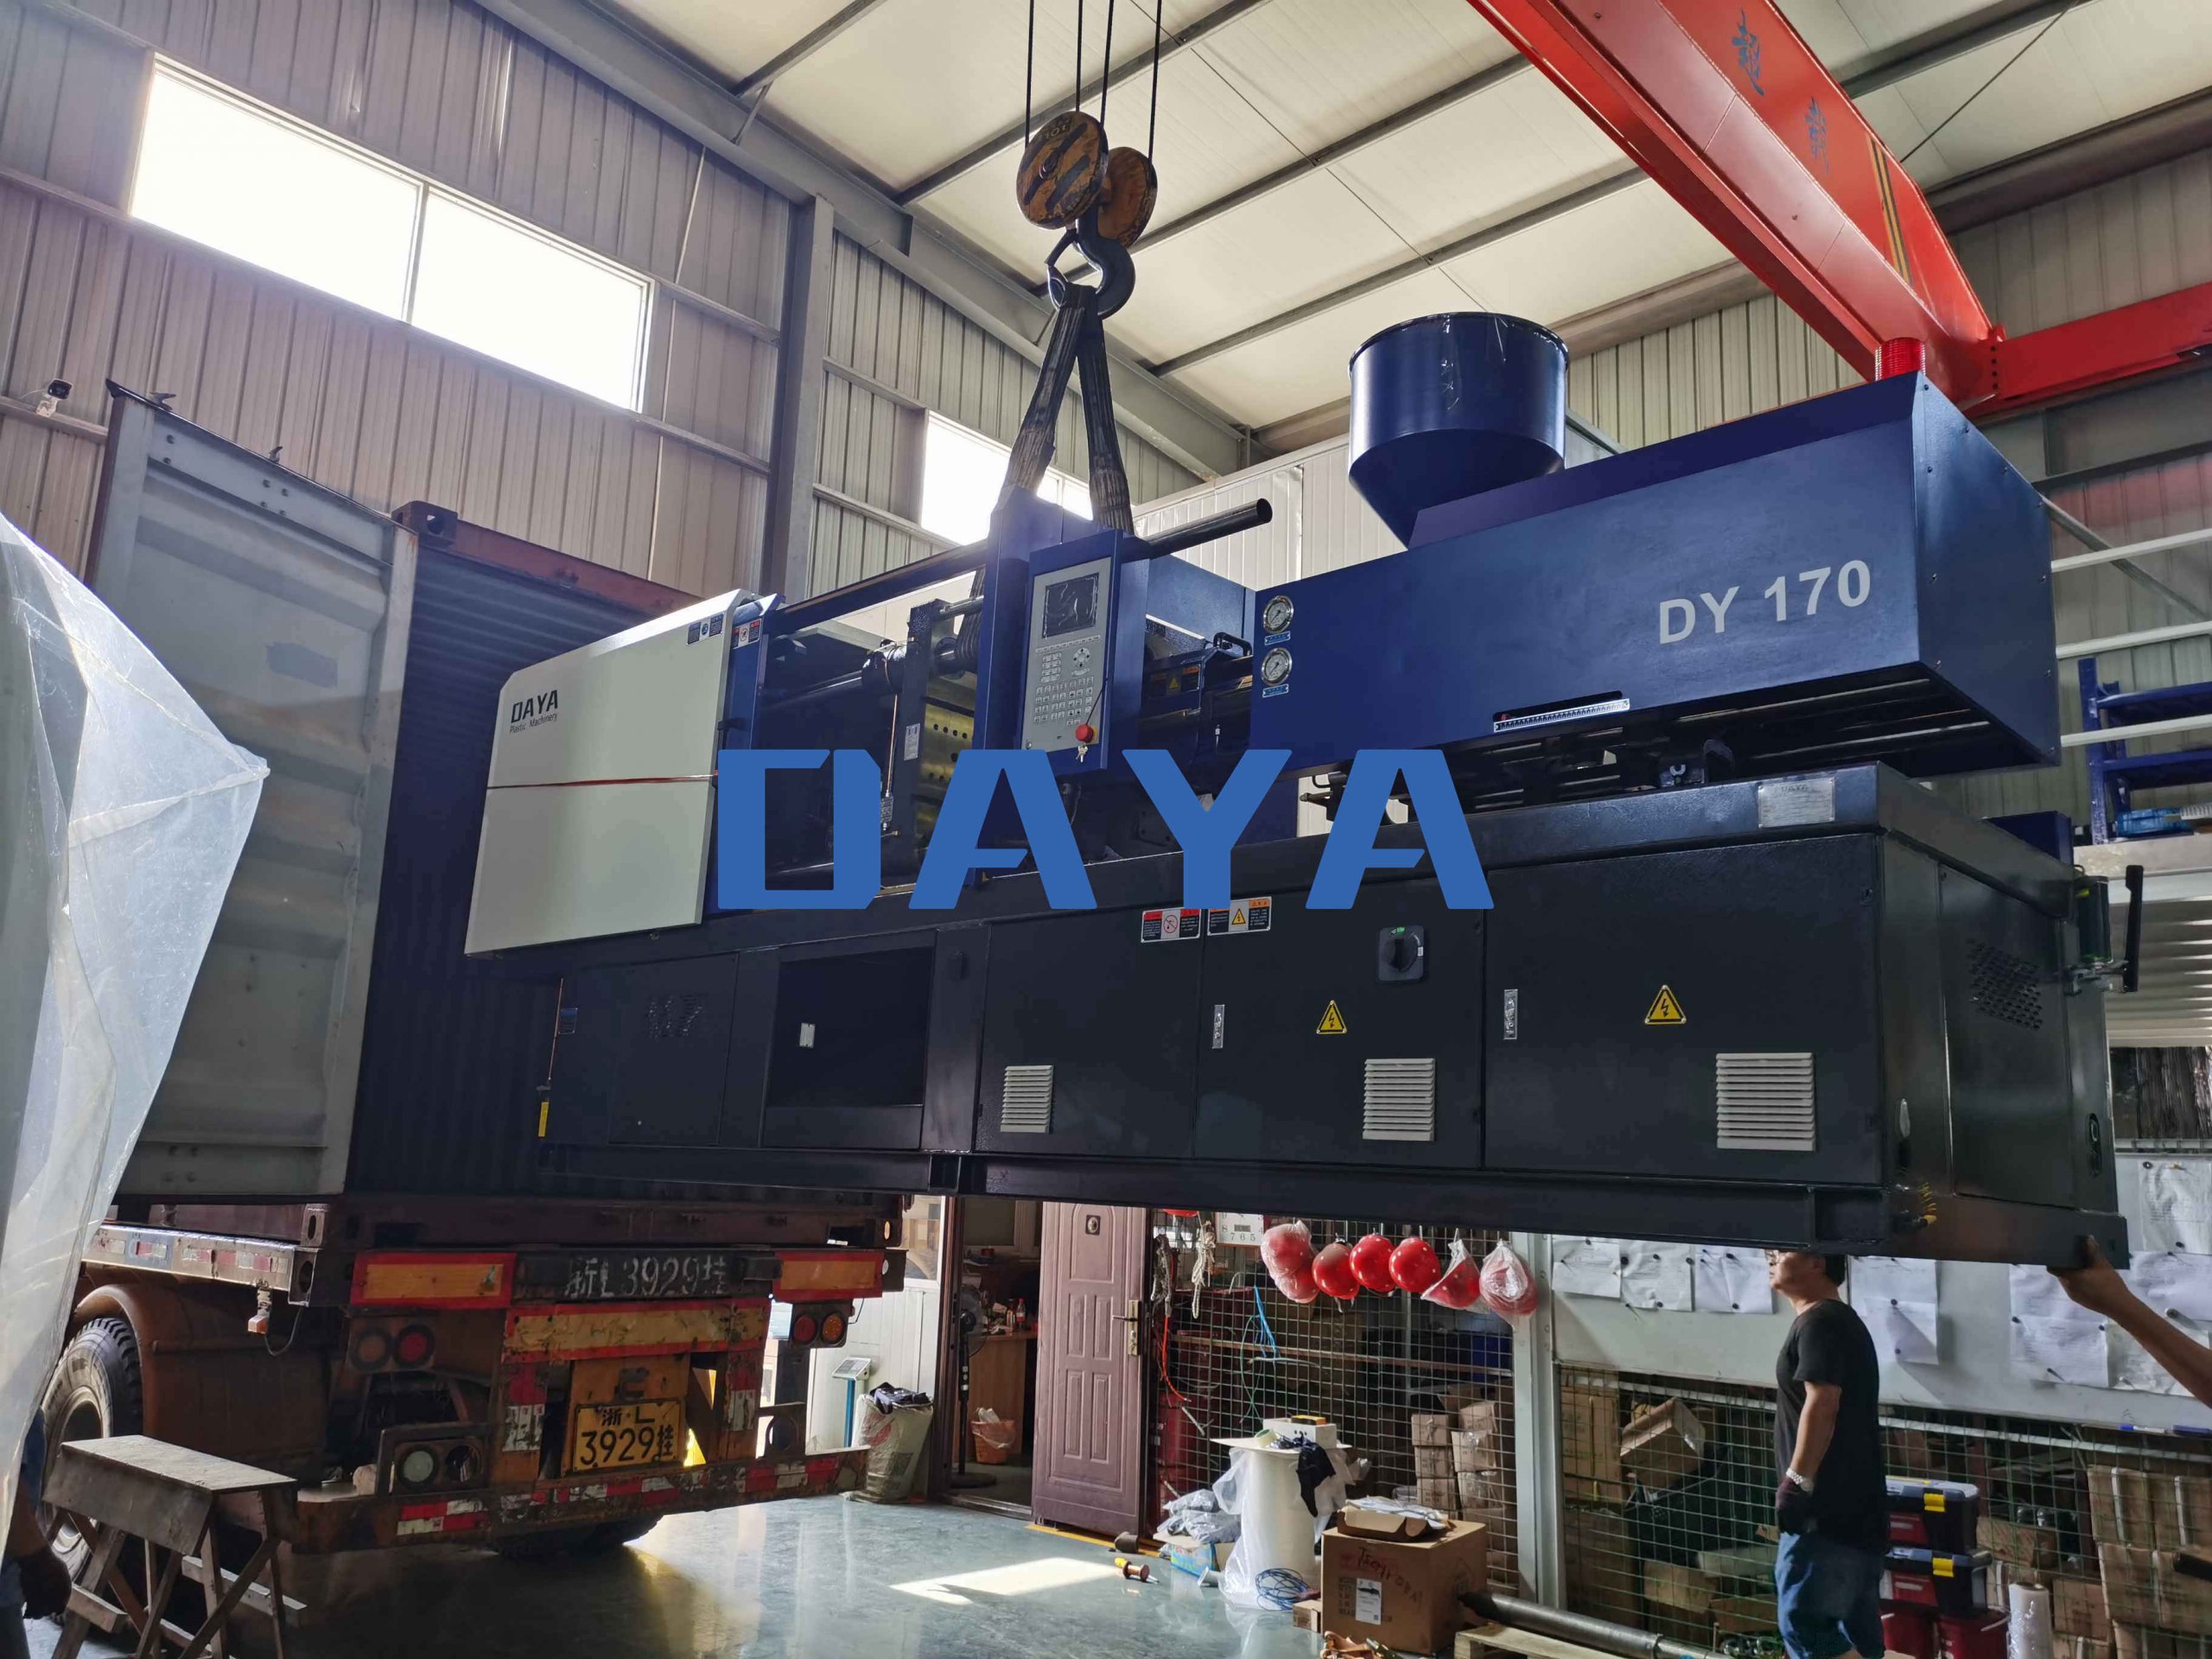 How to Ship an Injection Molding Machine